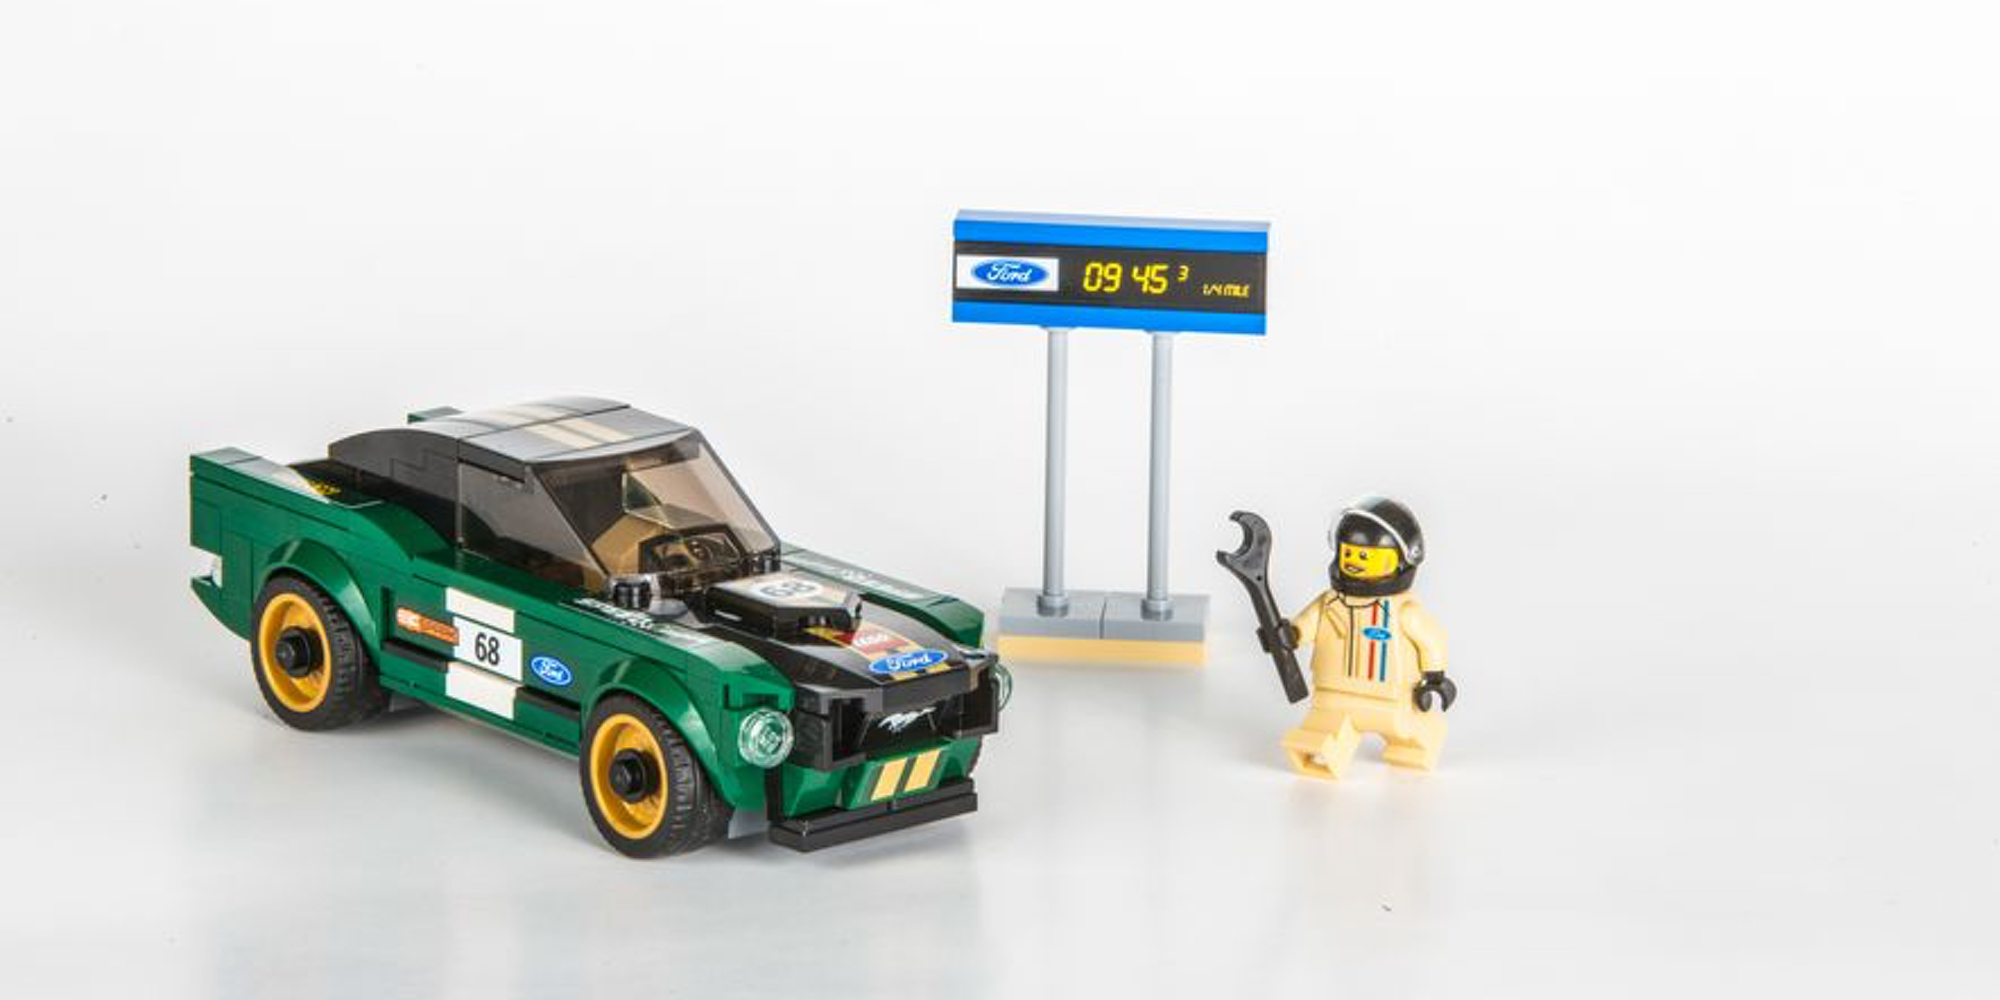 LEGO Speed Champions - 9to5Toys